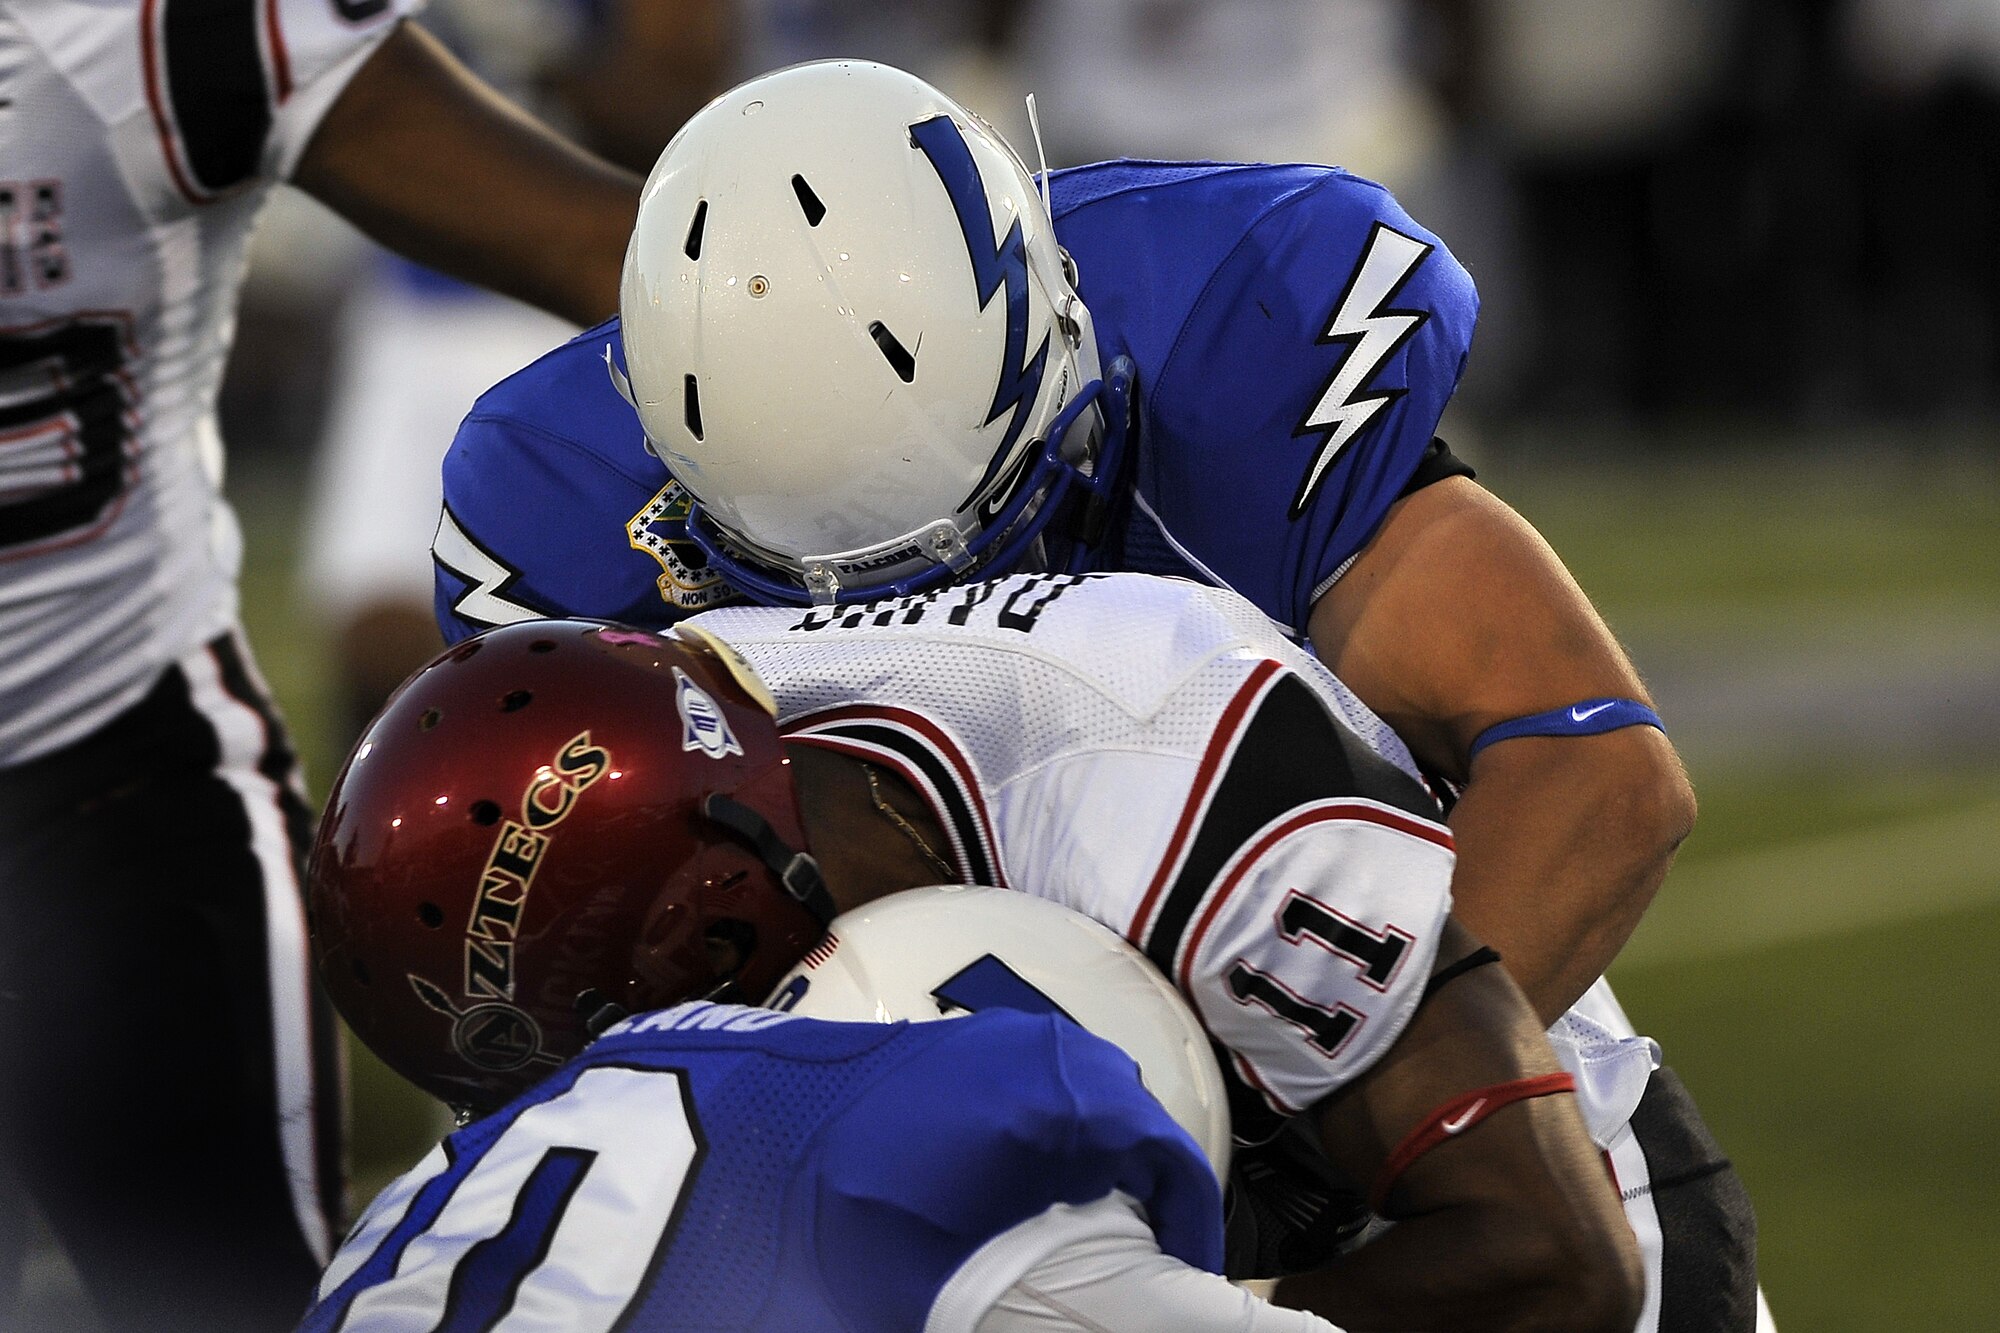 San Diego State's Brandon Davis is wrapped up by Air Force defenders during the Aztecs-Falcons game at Falcon Stadium Oct. 13, 2011. The Aztecs had 410 yards of total offense in their 41-27 victory over Air Force. (U.S. Air Force photo/Bill Evans)